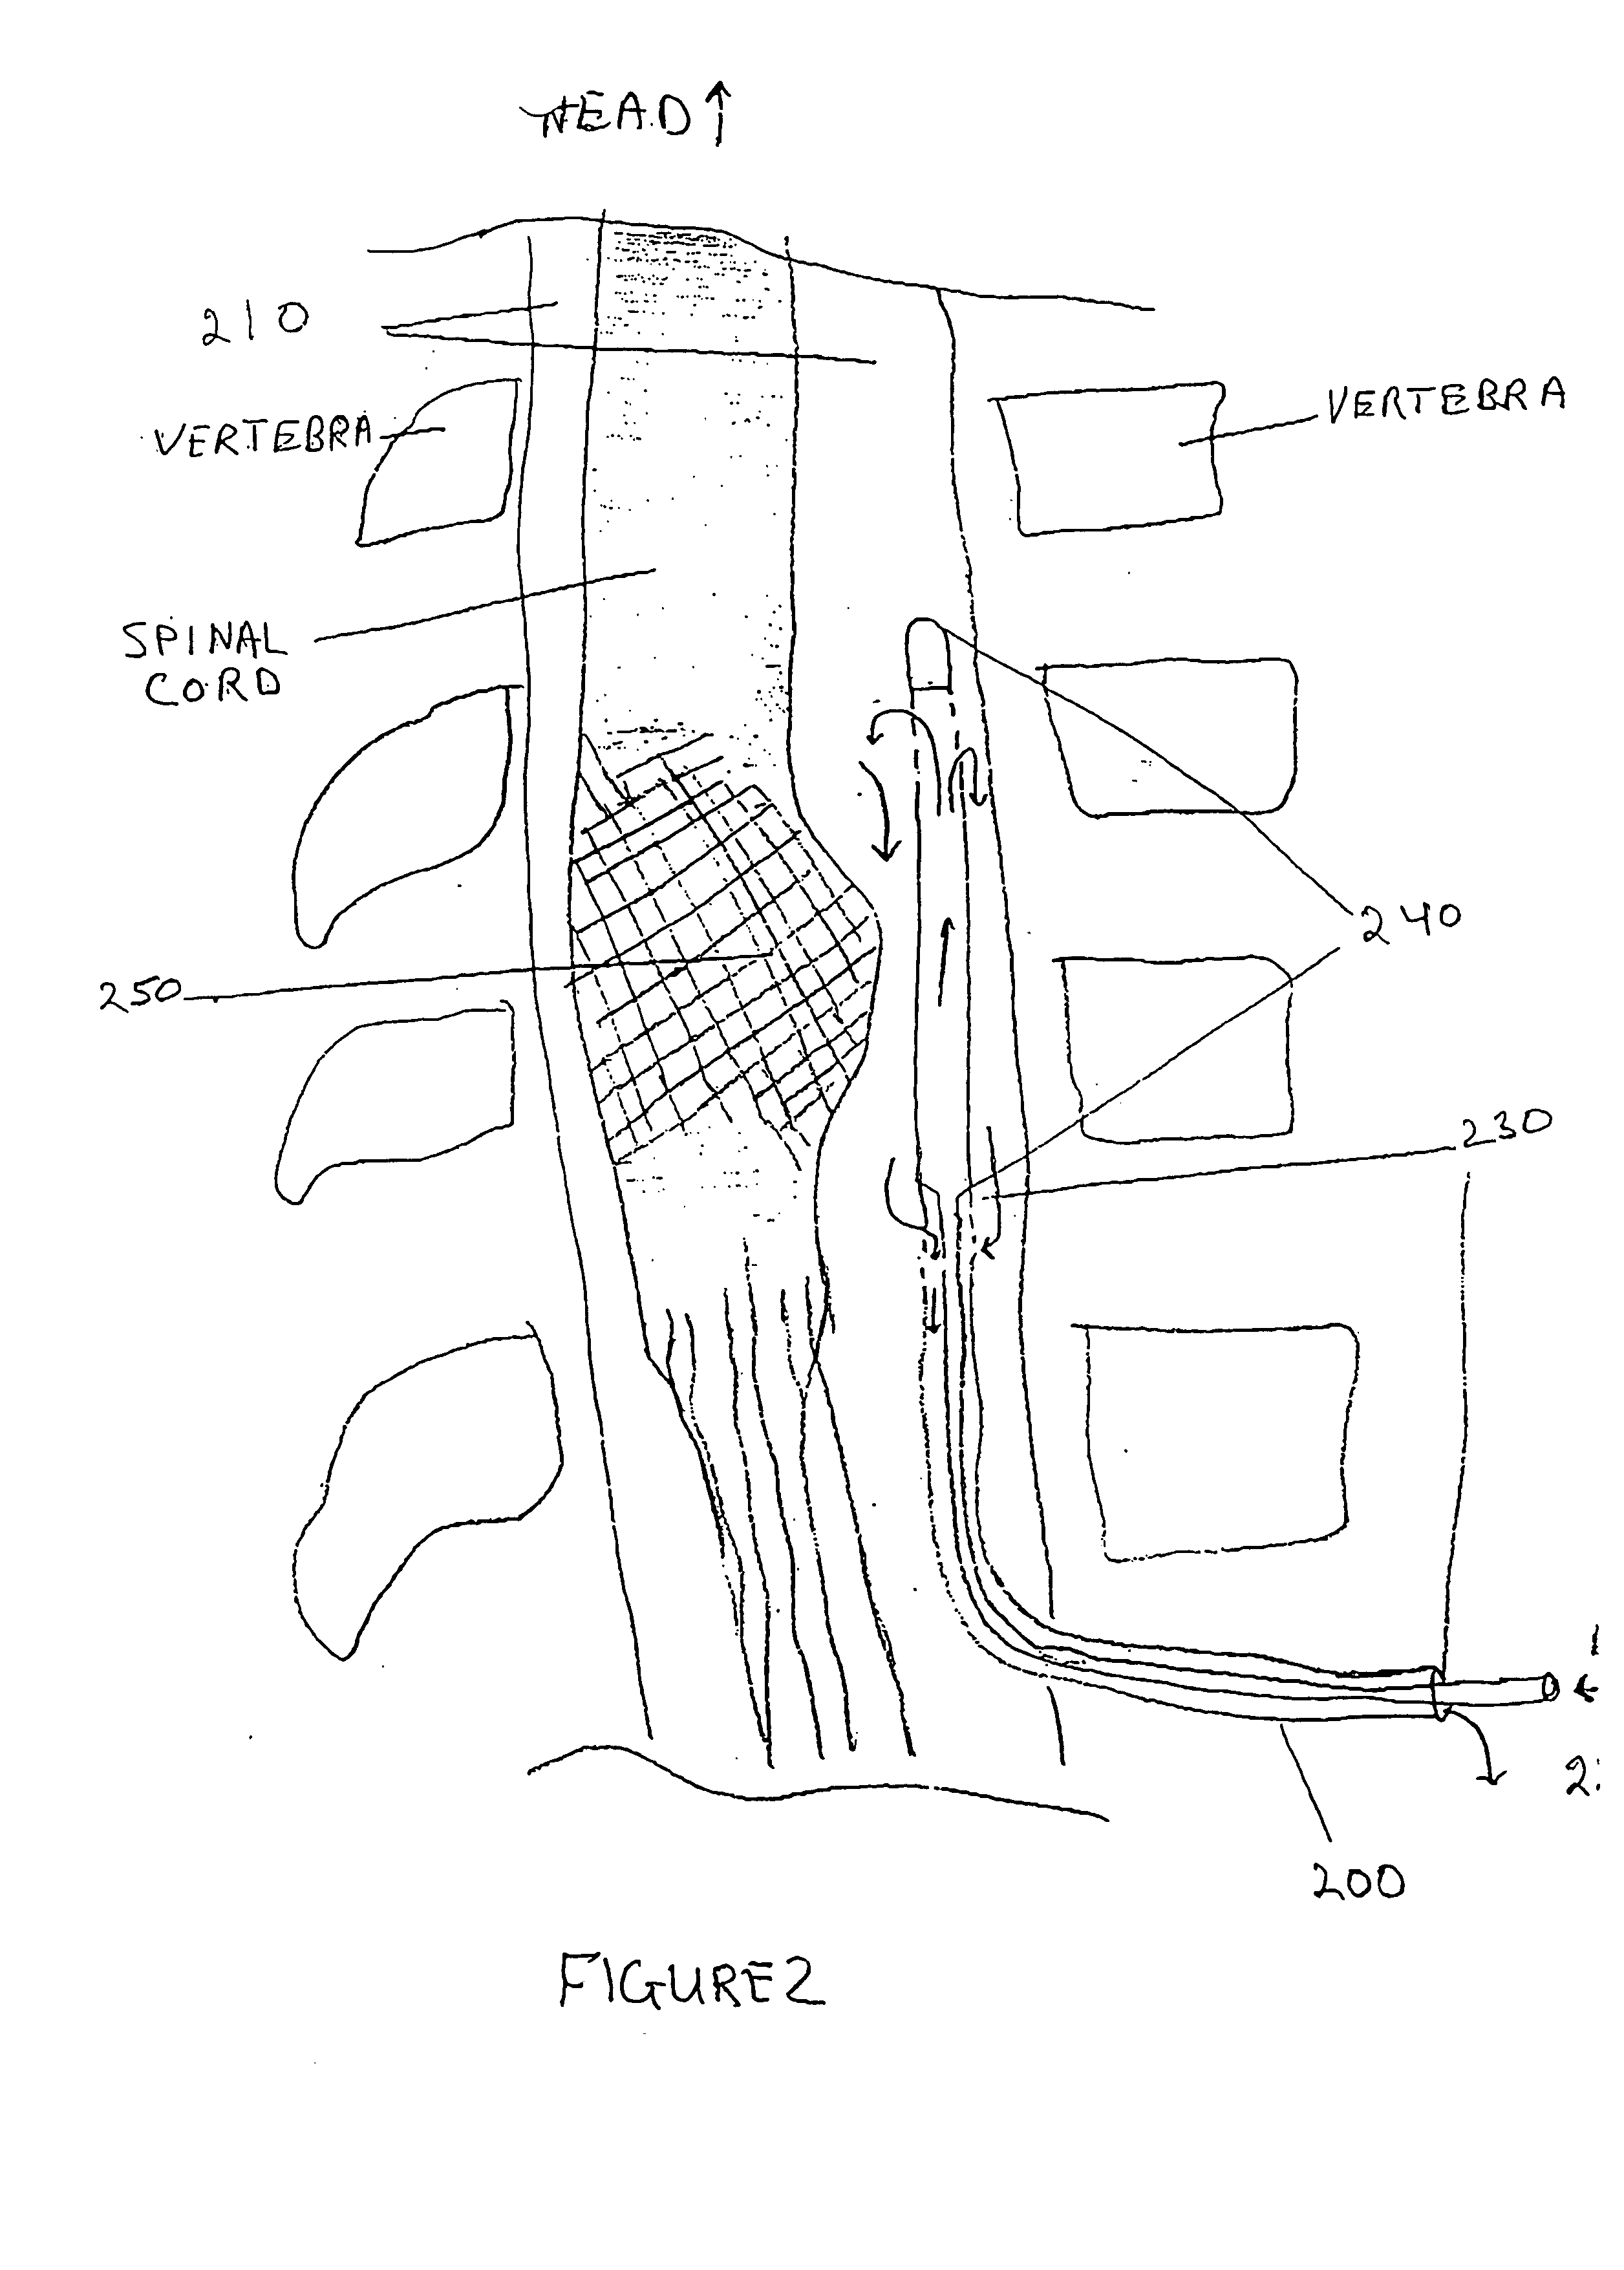 Subarachnoid spinal catheter for transporting cerebrospinal fluid